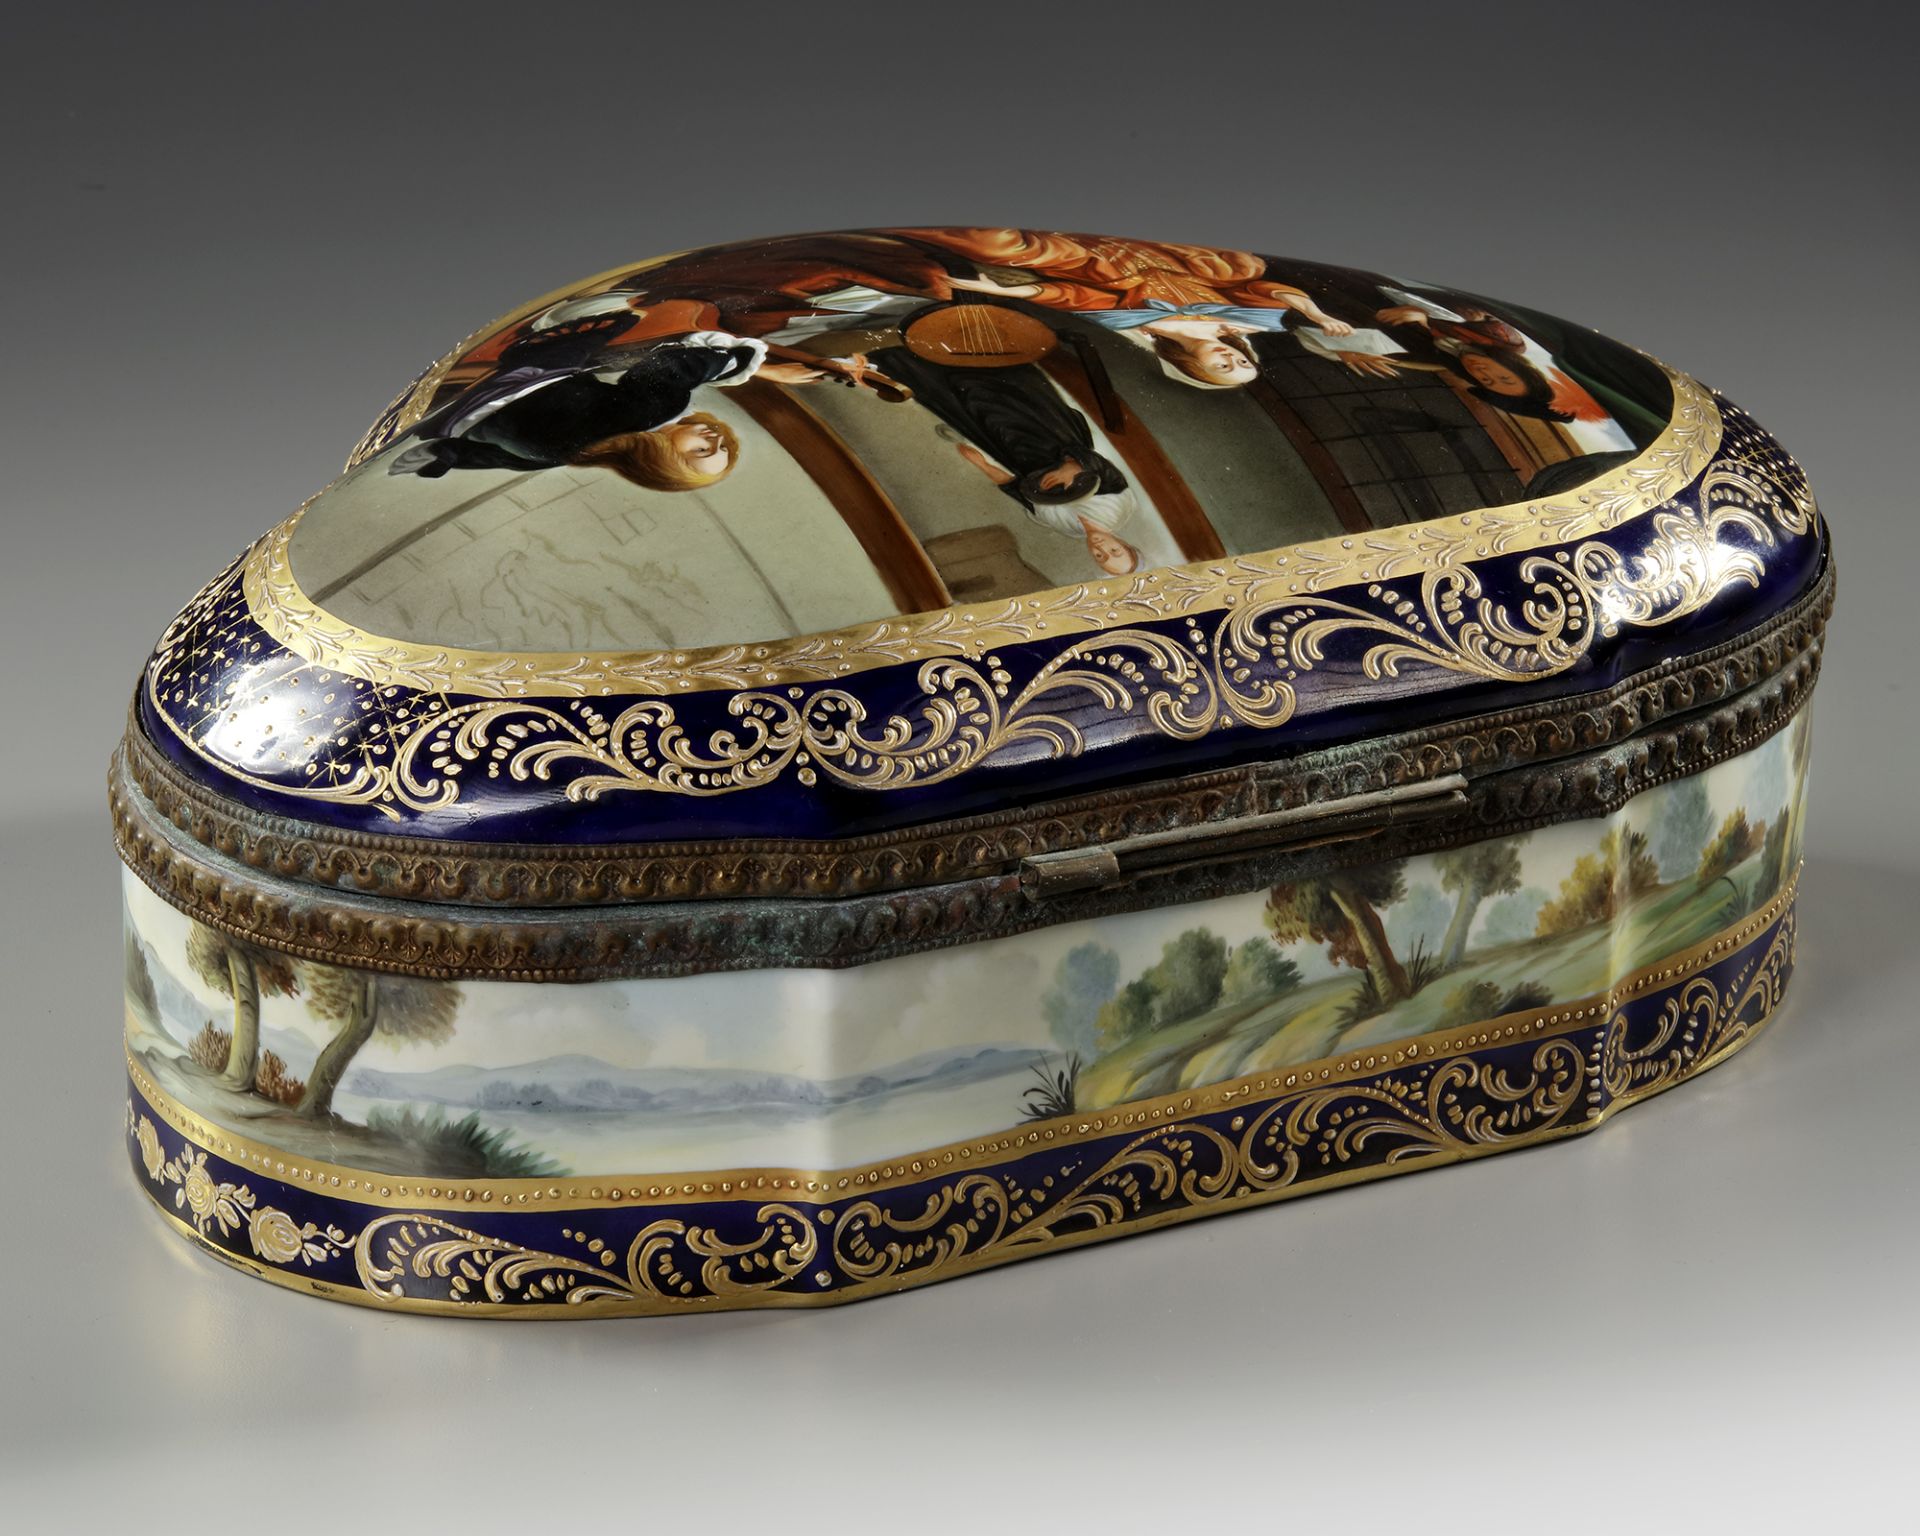 A PORCELAIN JEWELRY BOX, 19TH CENTURY - Image 2 of 4